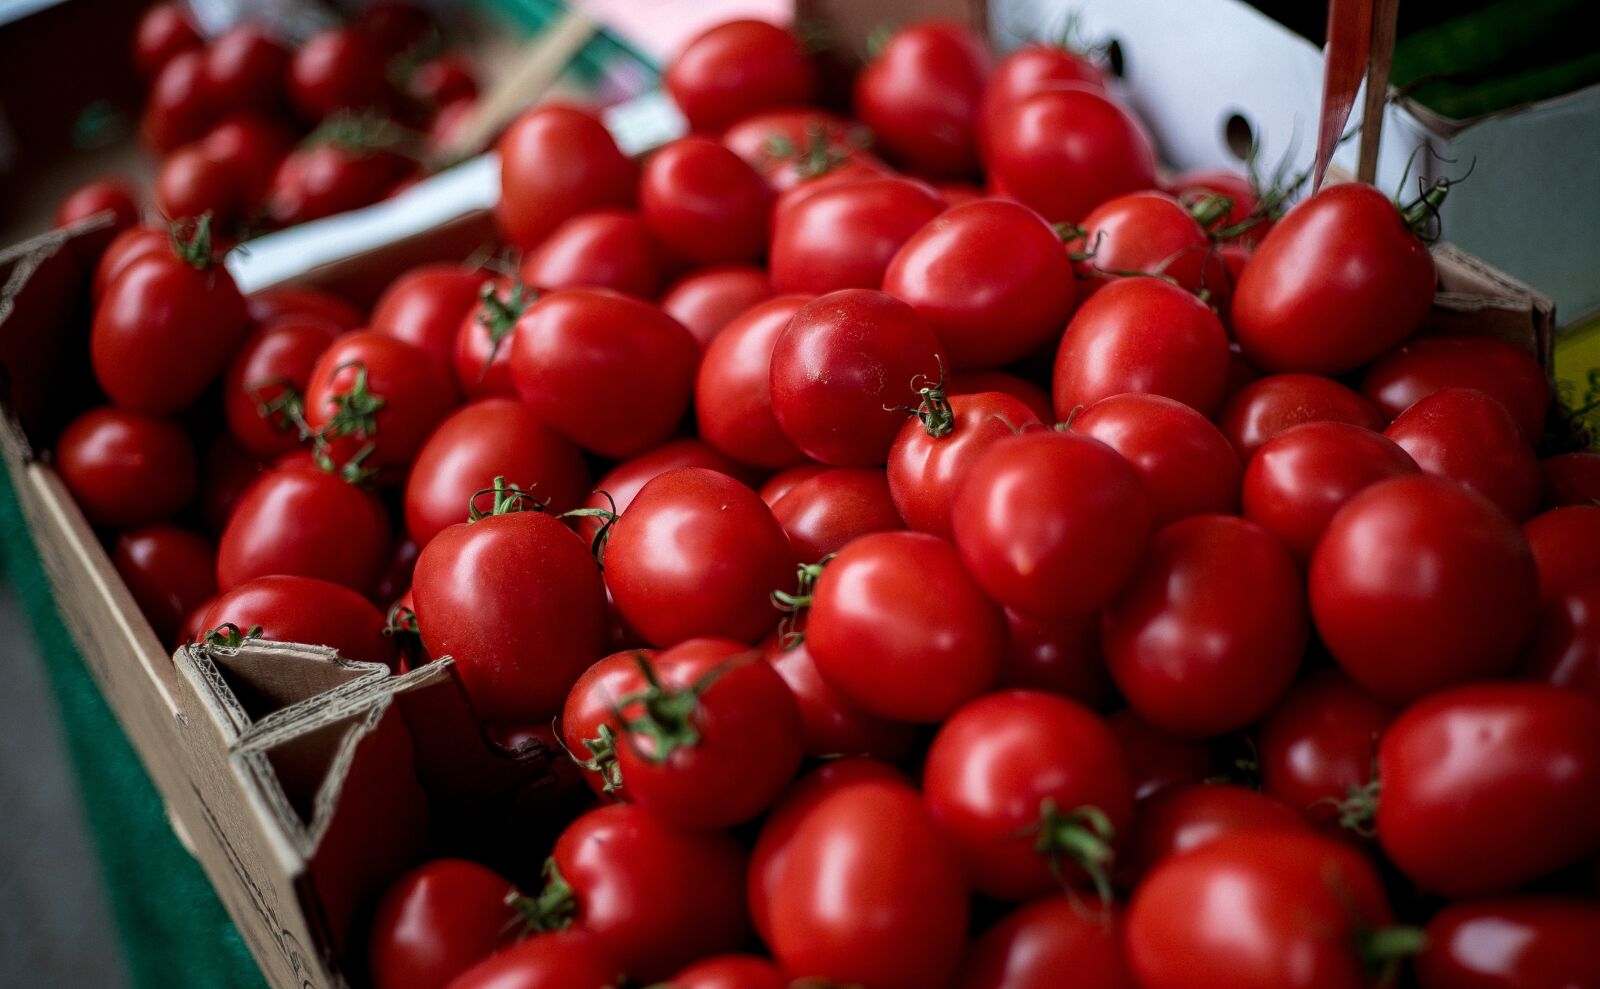 50mm F1.8 II sample photo. Tomatoes, vegetables, cherry tomato photography